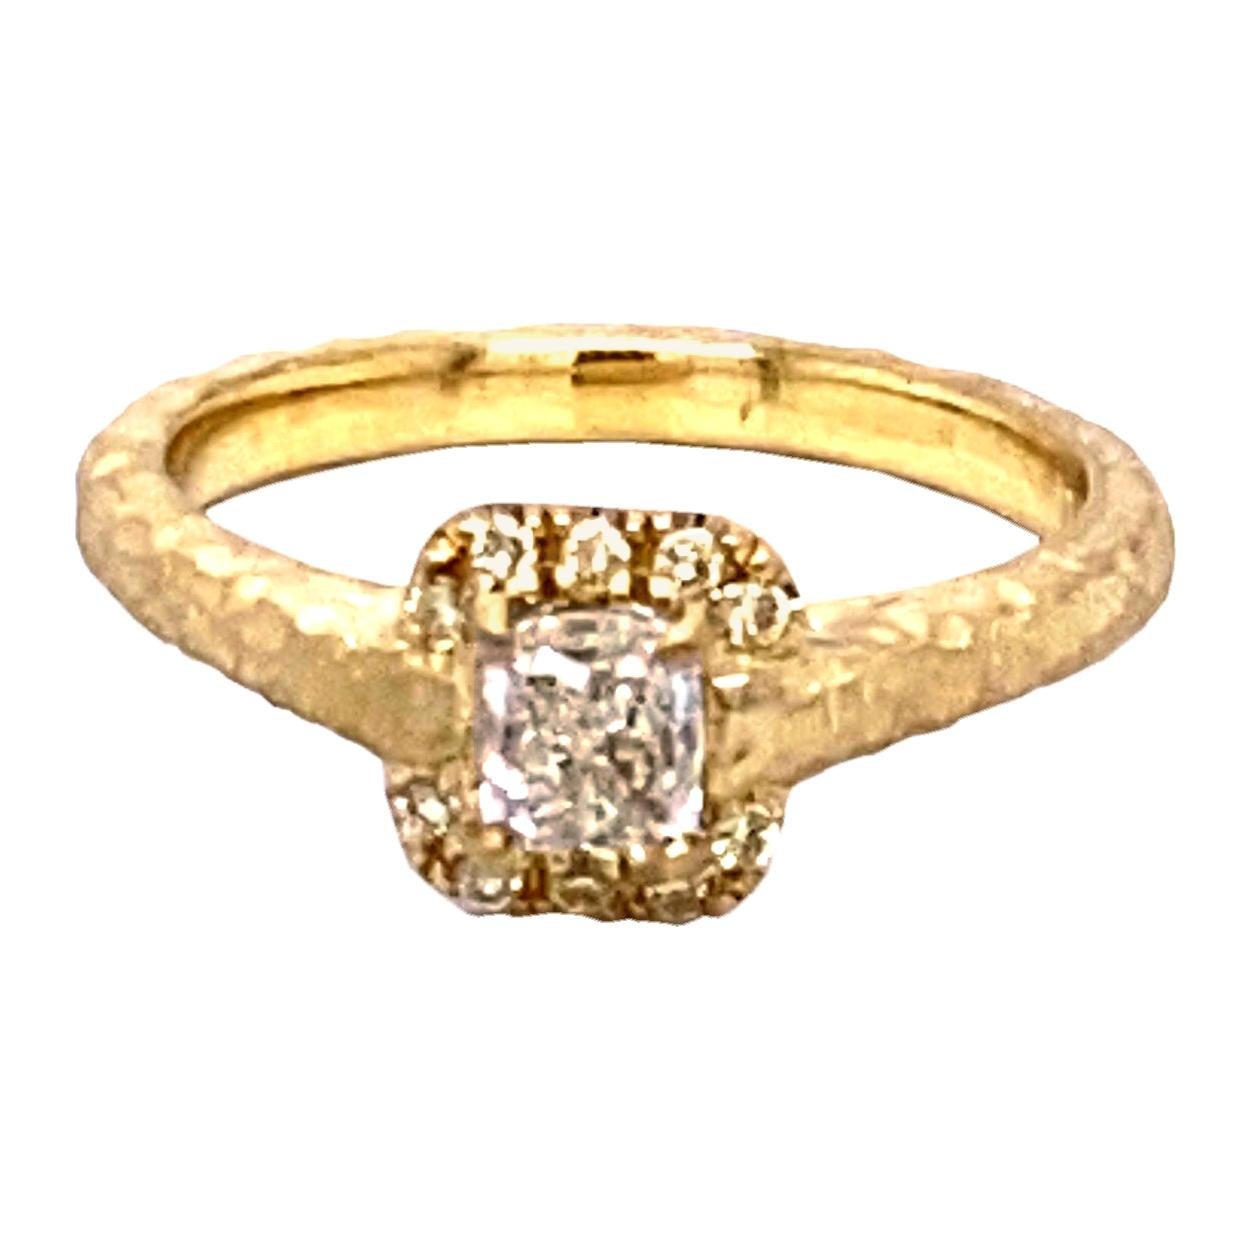 18K Hand-Hammered Engagement Ring with 0.46 Carat Radiant Diamond Center